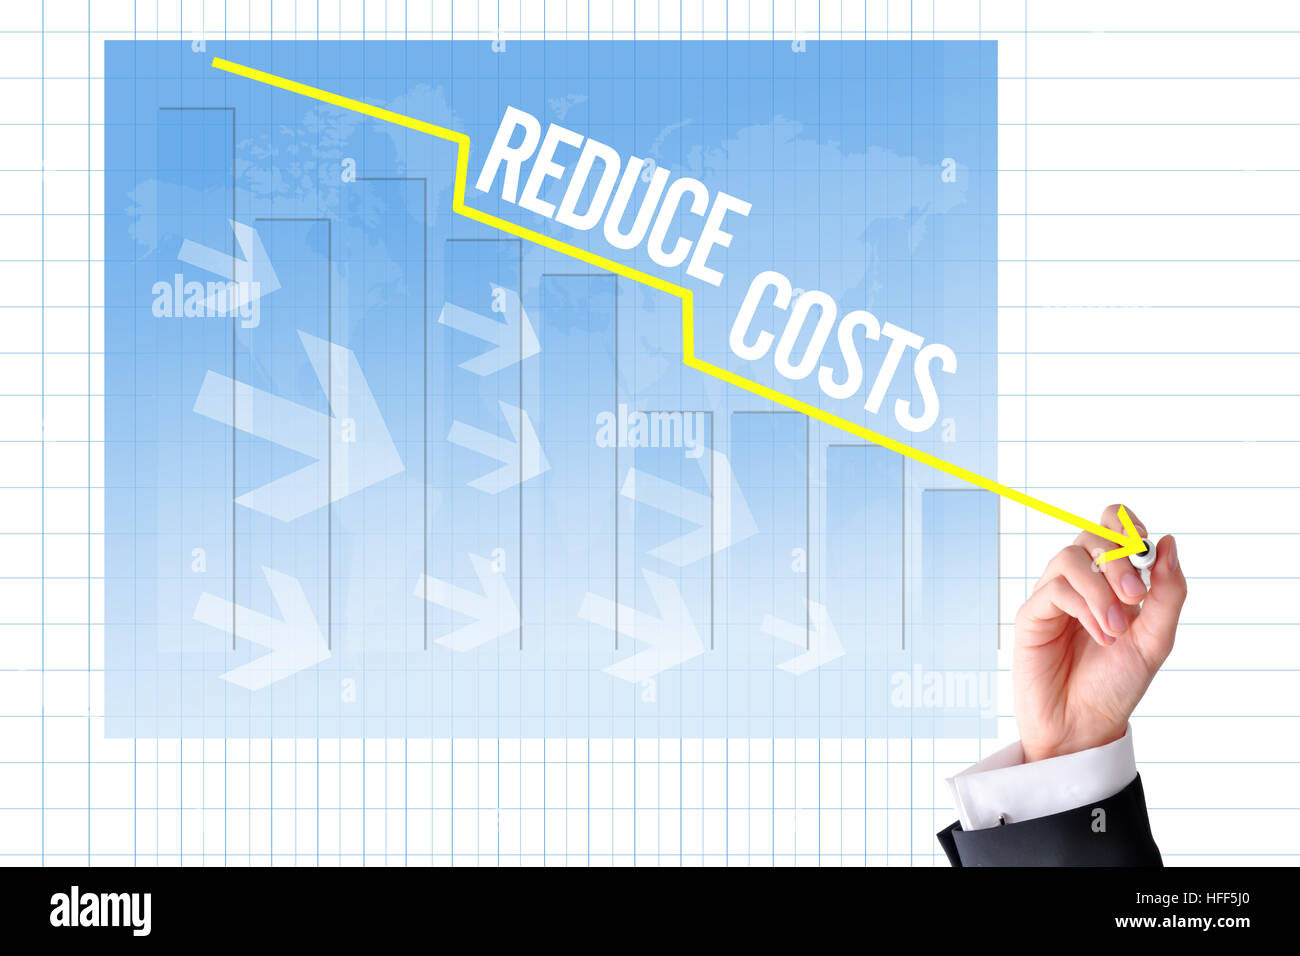 Reduce costs concept with businessman hand draw a graph Stock Photo